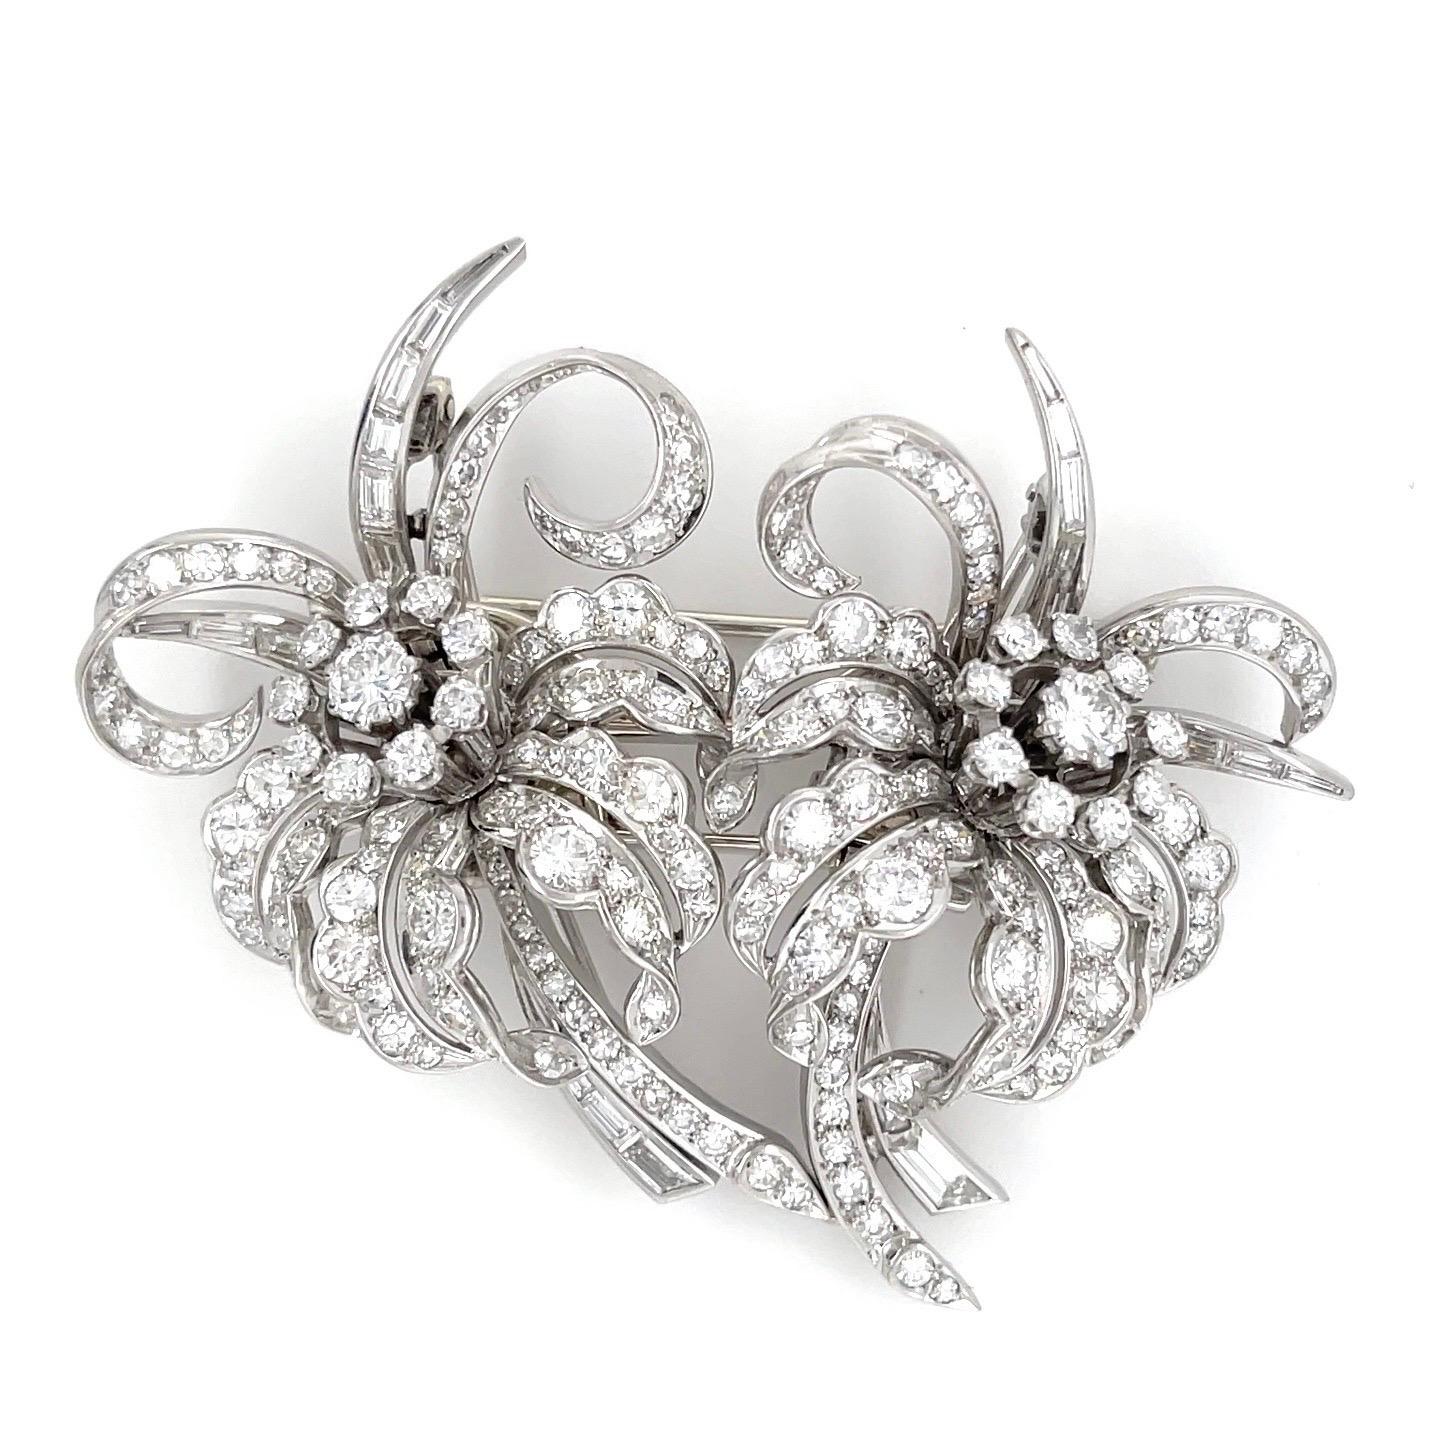 Magnificent French Hand Made Platinum & Diamond Brooch For Sale 5